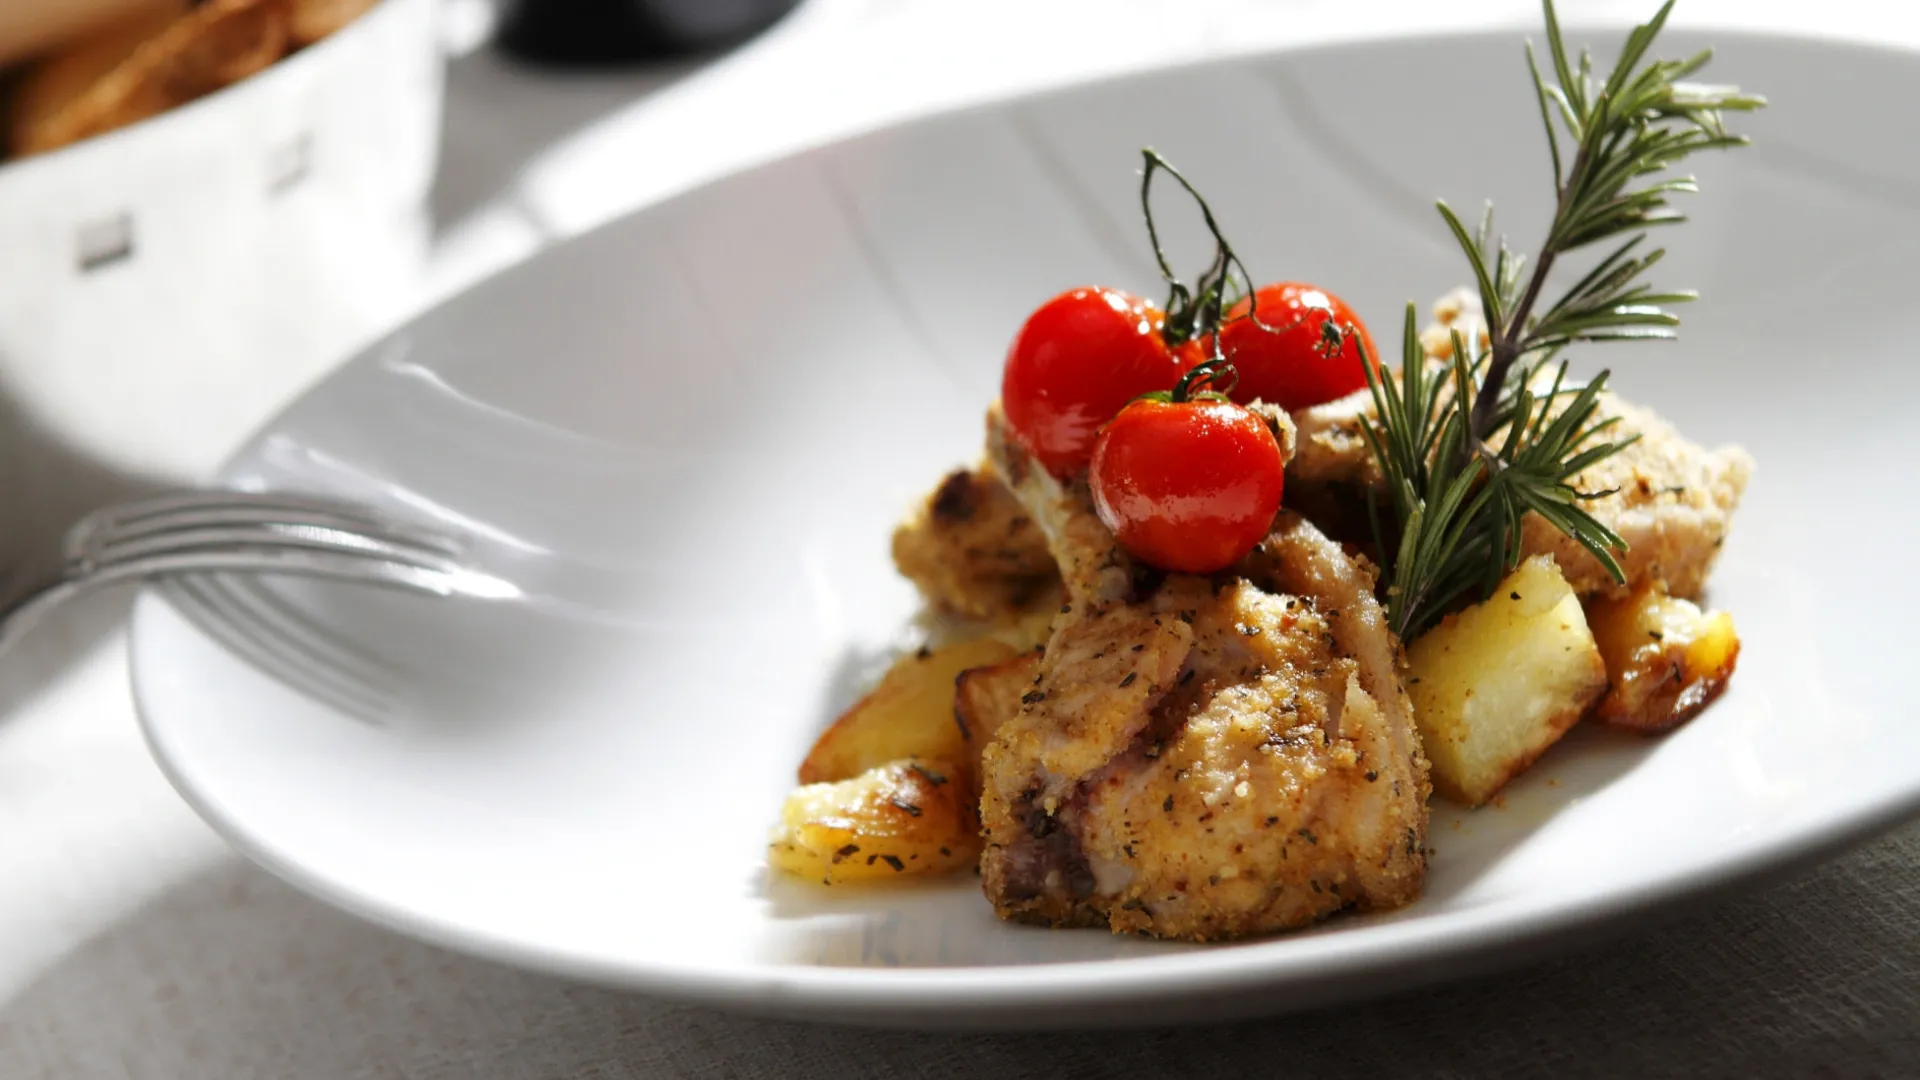 Chicken dish with potatoes, cherry tomatoes, and rosemary.